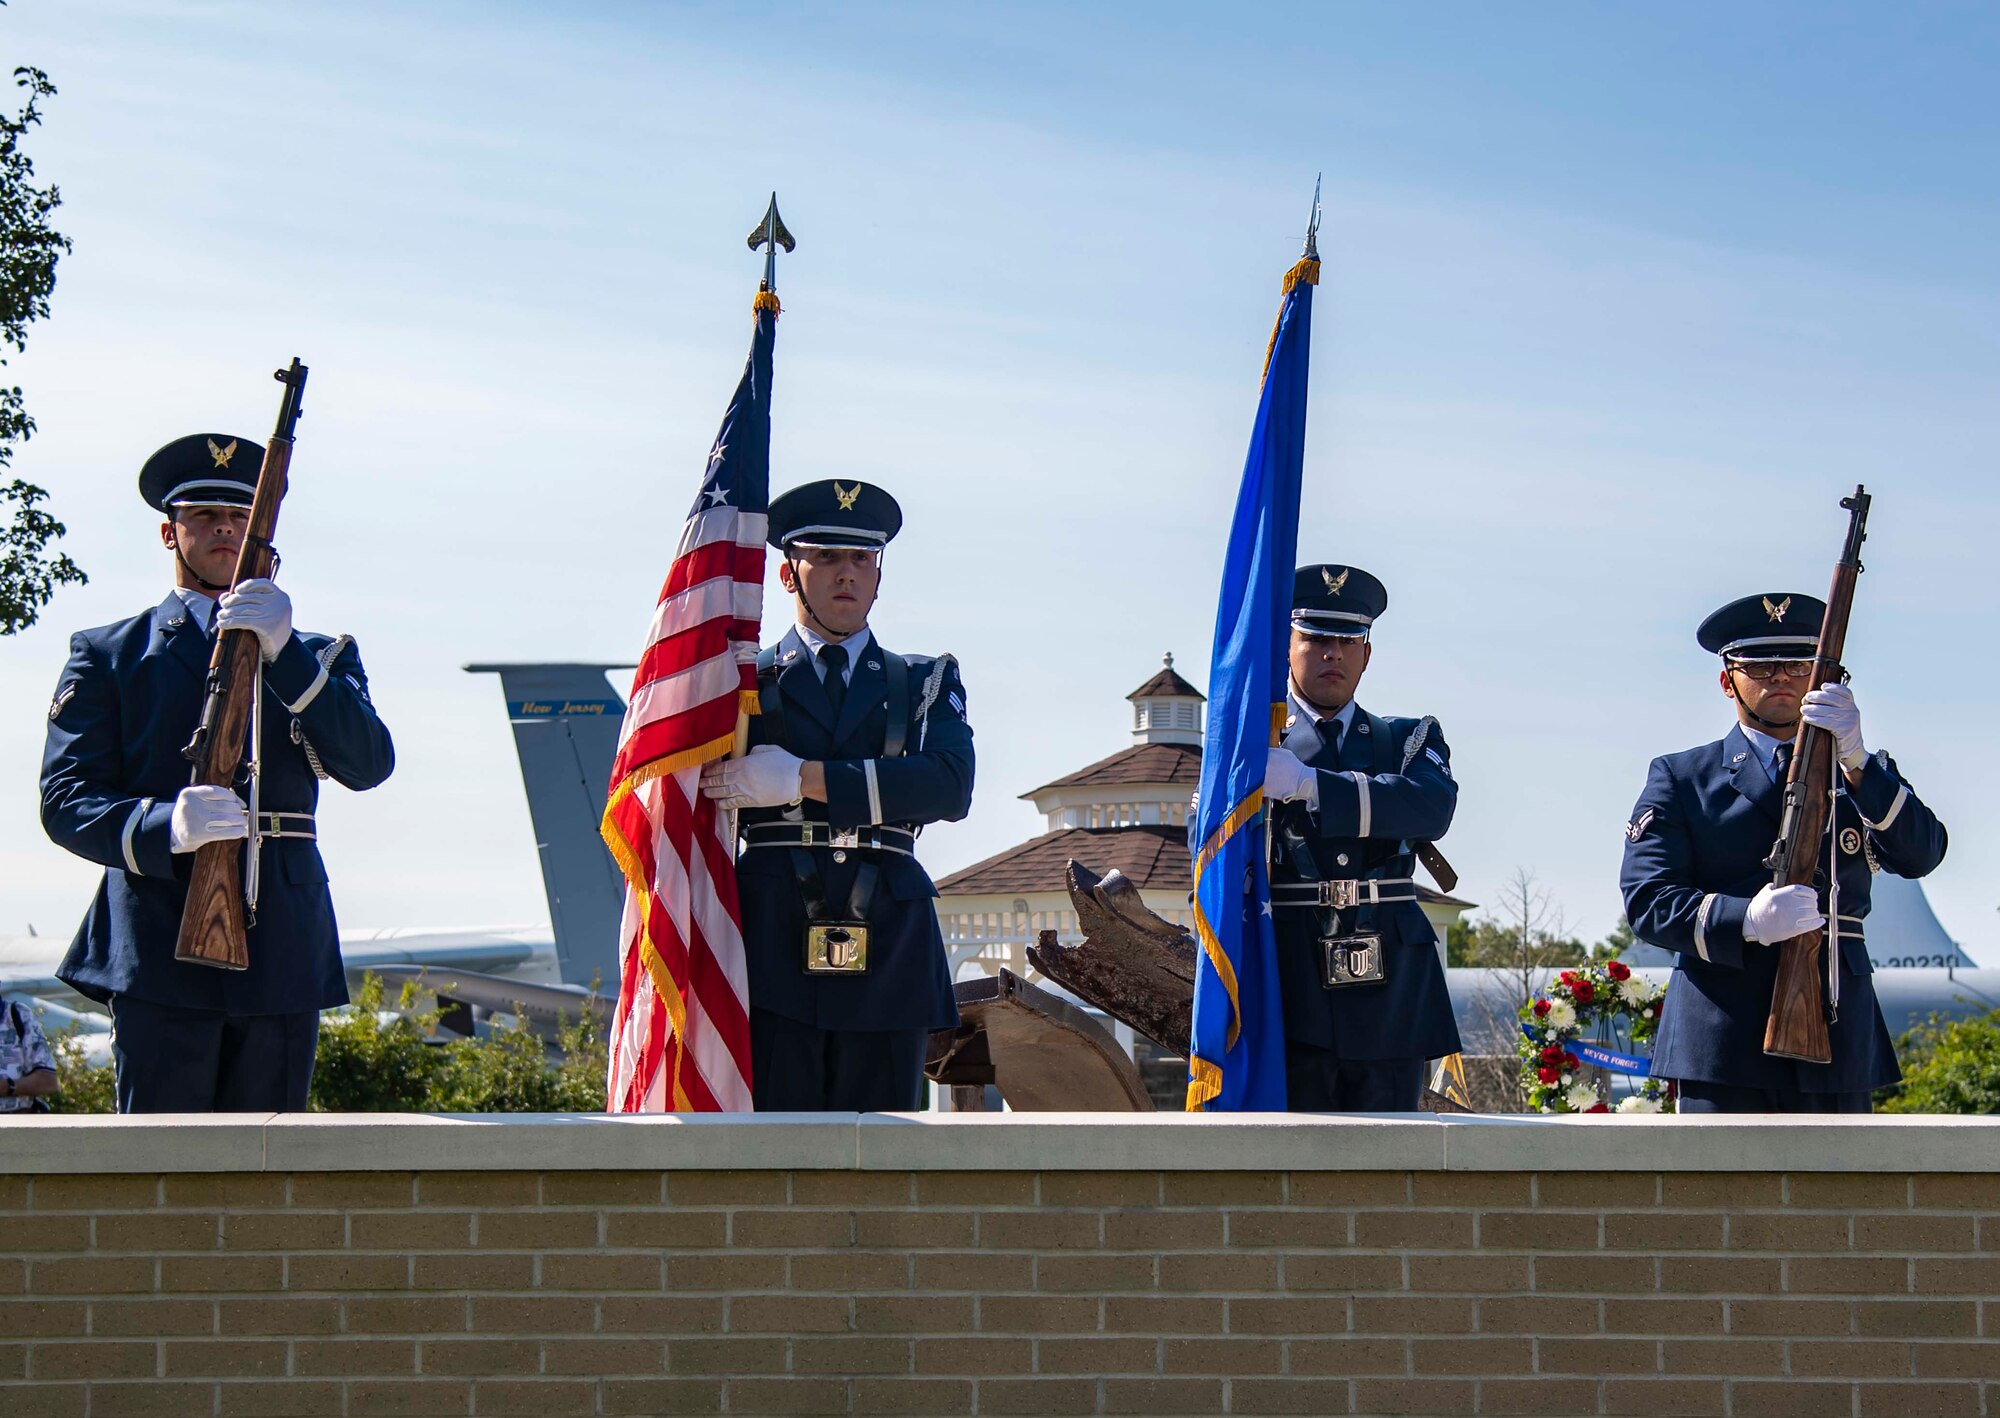 Members of the Dover Air Force Base Honor Guard present the colors during the 20th Anniversary 9/11 Remembrance Ceremony held at the Air Mobility Command Museum’s 9/11 Memorial on Dover AFB, Delaware, Sept. 11, 2021. The base hosted the ceremony to remember and honor those who perished in the attacks on Sept. 11, 2001. (U.S. Air Force photo by Senior Airman Stephani Barge)